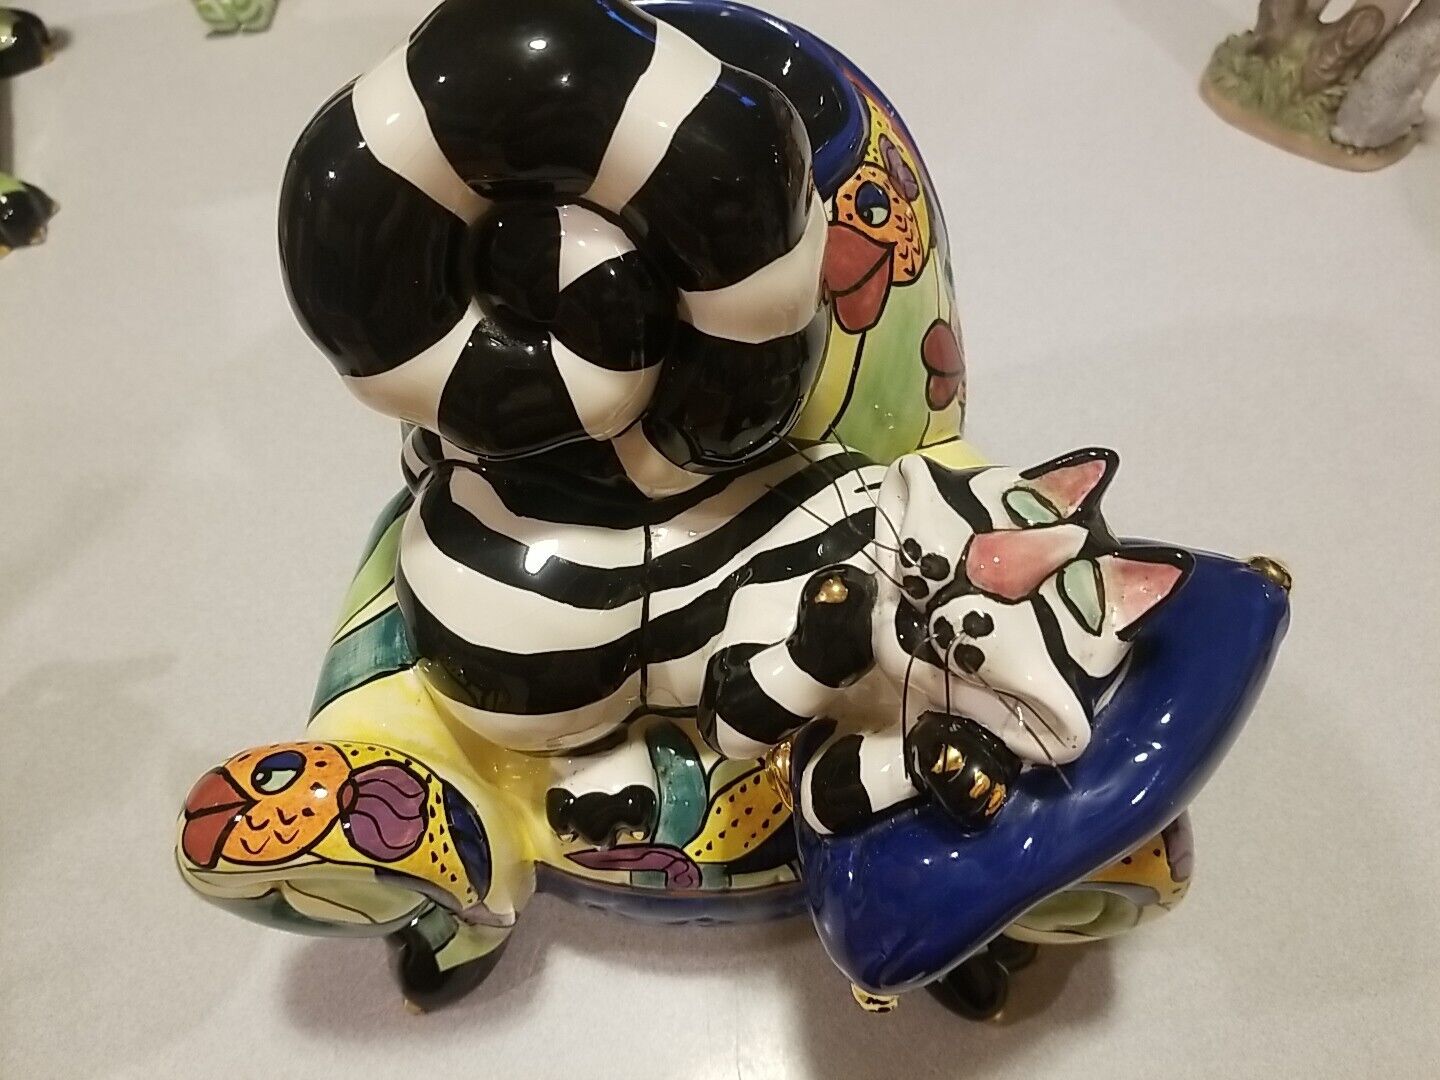 Clancey the Cat Character Collectible Ceramic Figure - Swak by Lynda Corneille